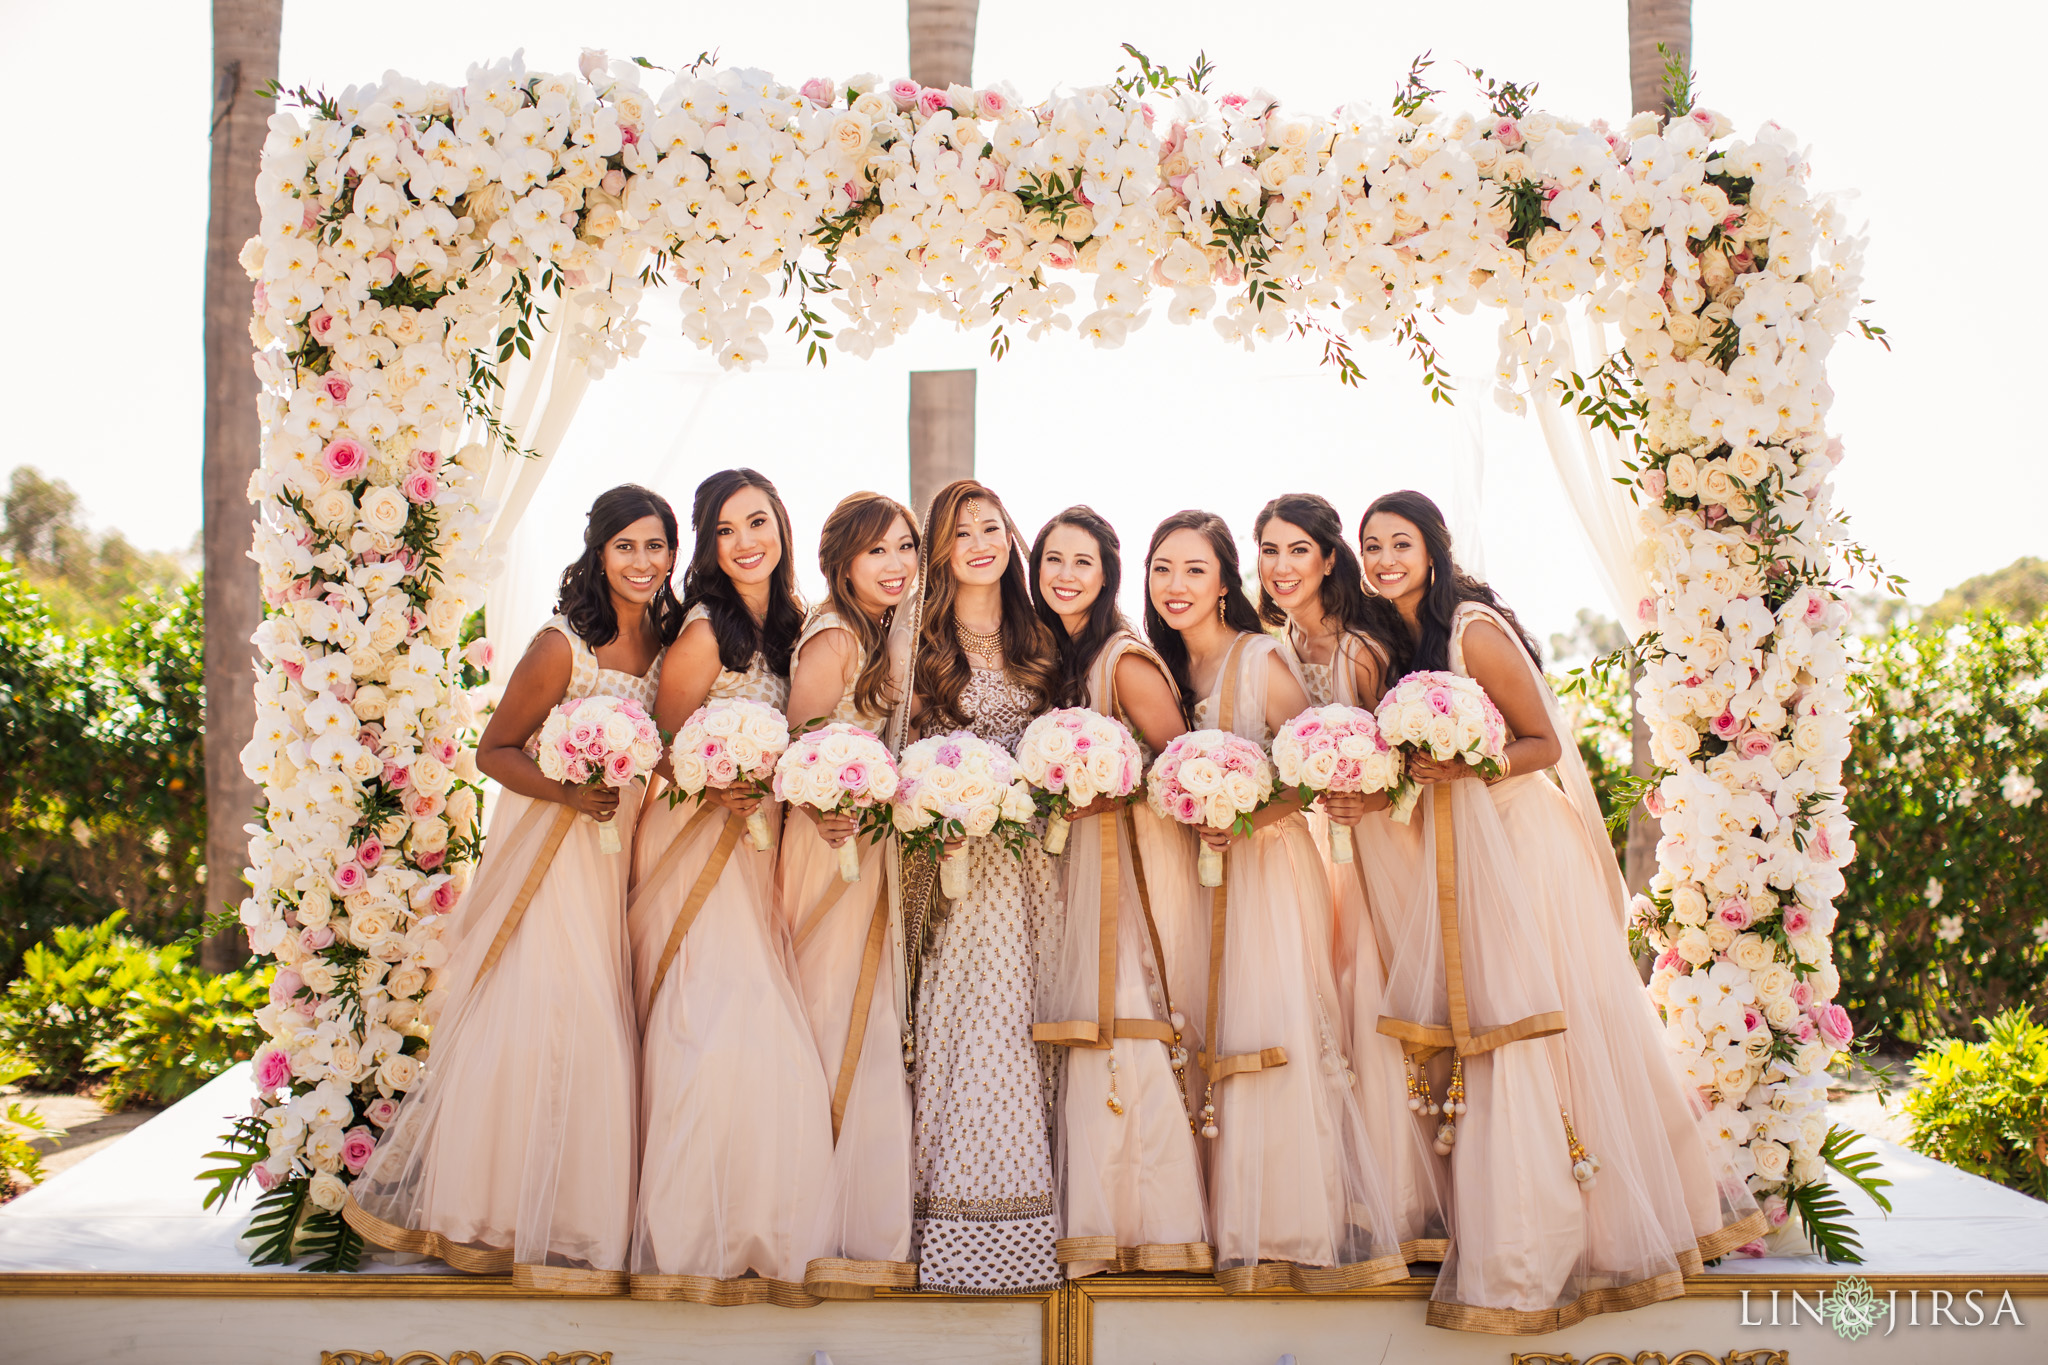 Seven bridesmaids posing with white and pink rose flower bouquets in their hands, with the bride, under a white rose archway and palm trees, near the beach for Lin and Jirsa Los Angeles at the Park Hyatt Aviara Resort in Carlsbad, California